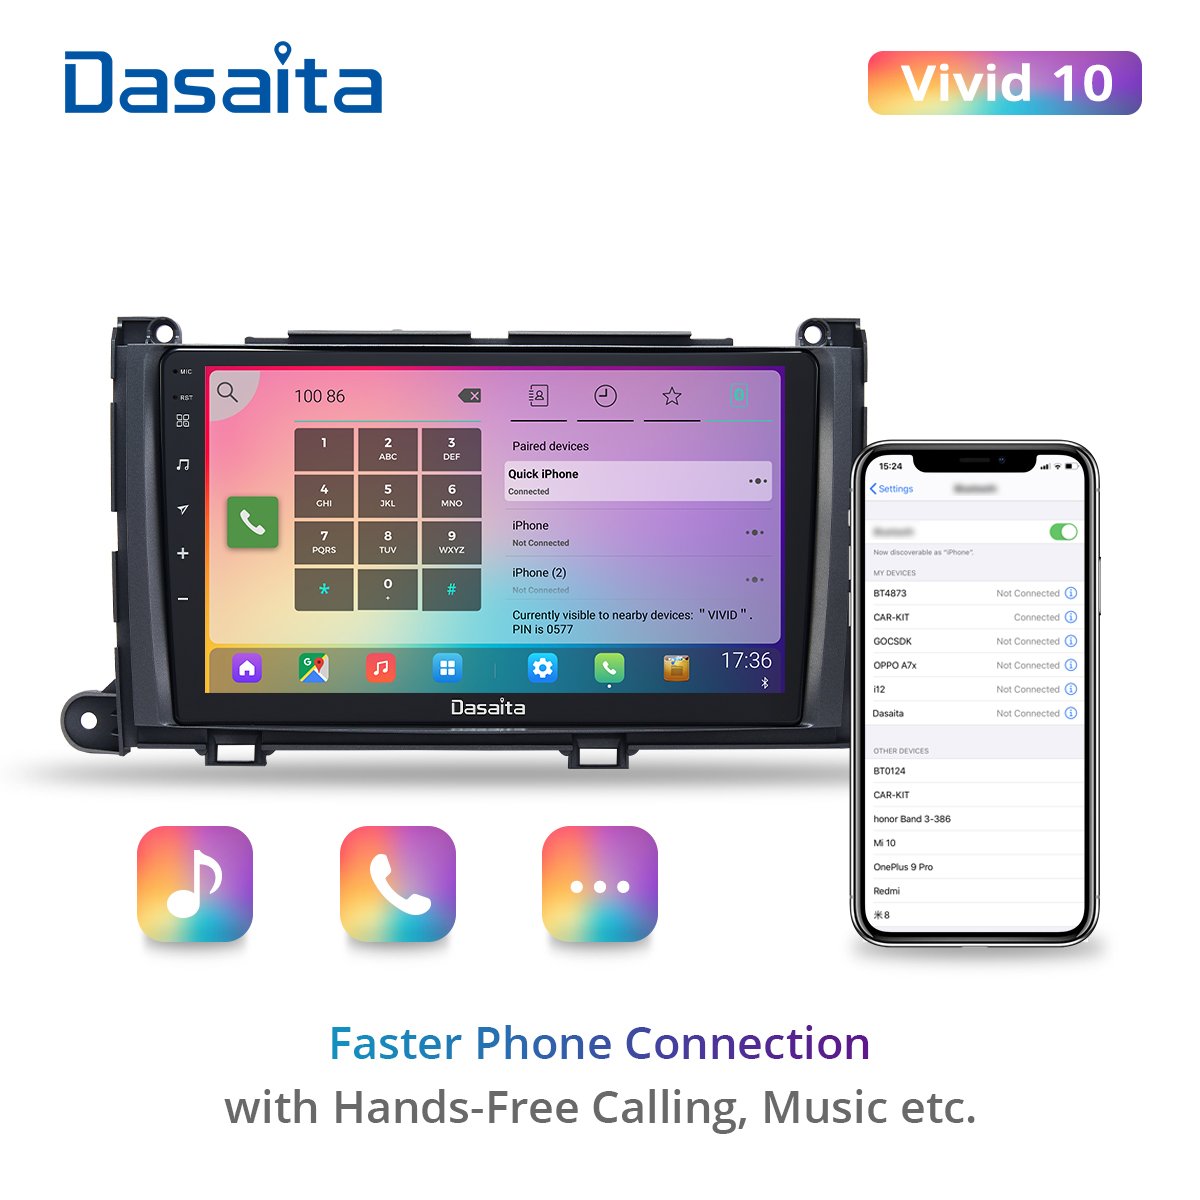 Dasaita Vivid For Toyota Sienna 2011 2012 2013 2014 Car stereo Android Carplay Android Auto 9" Touch Screen IPS 1280*720 4G 64G